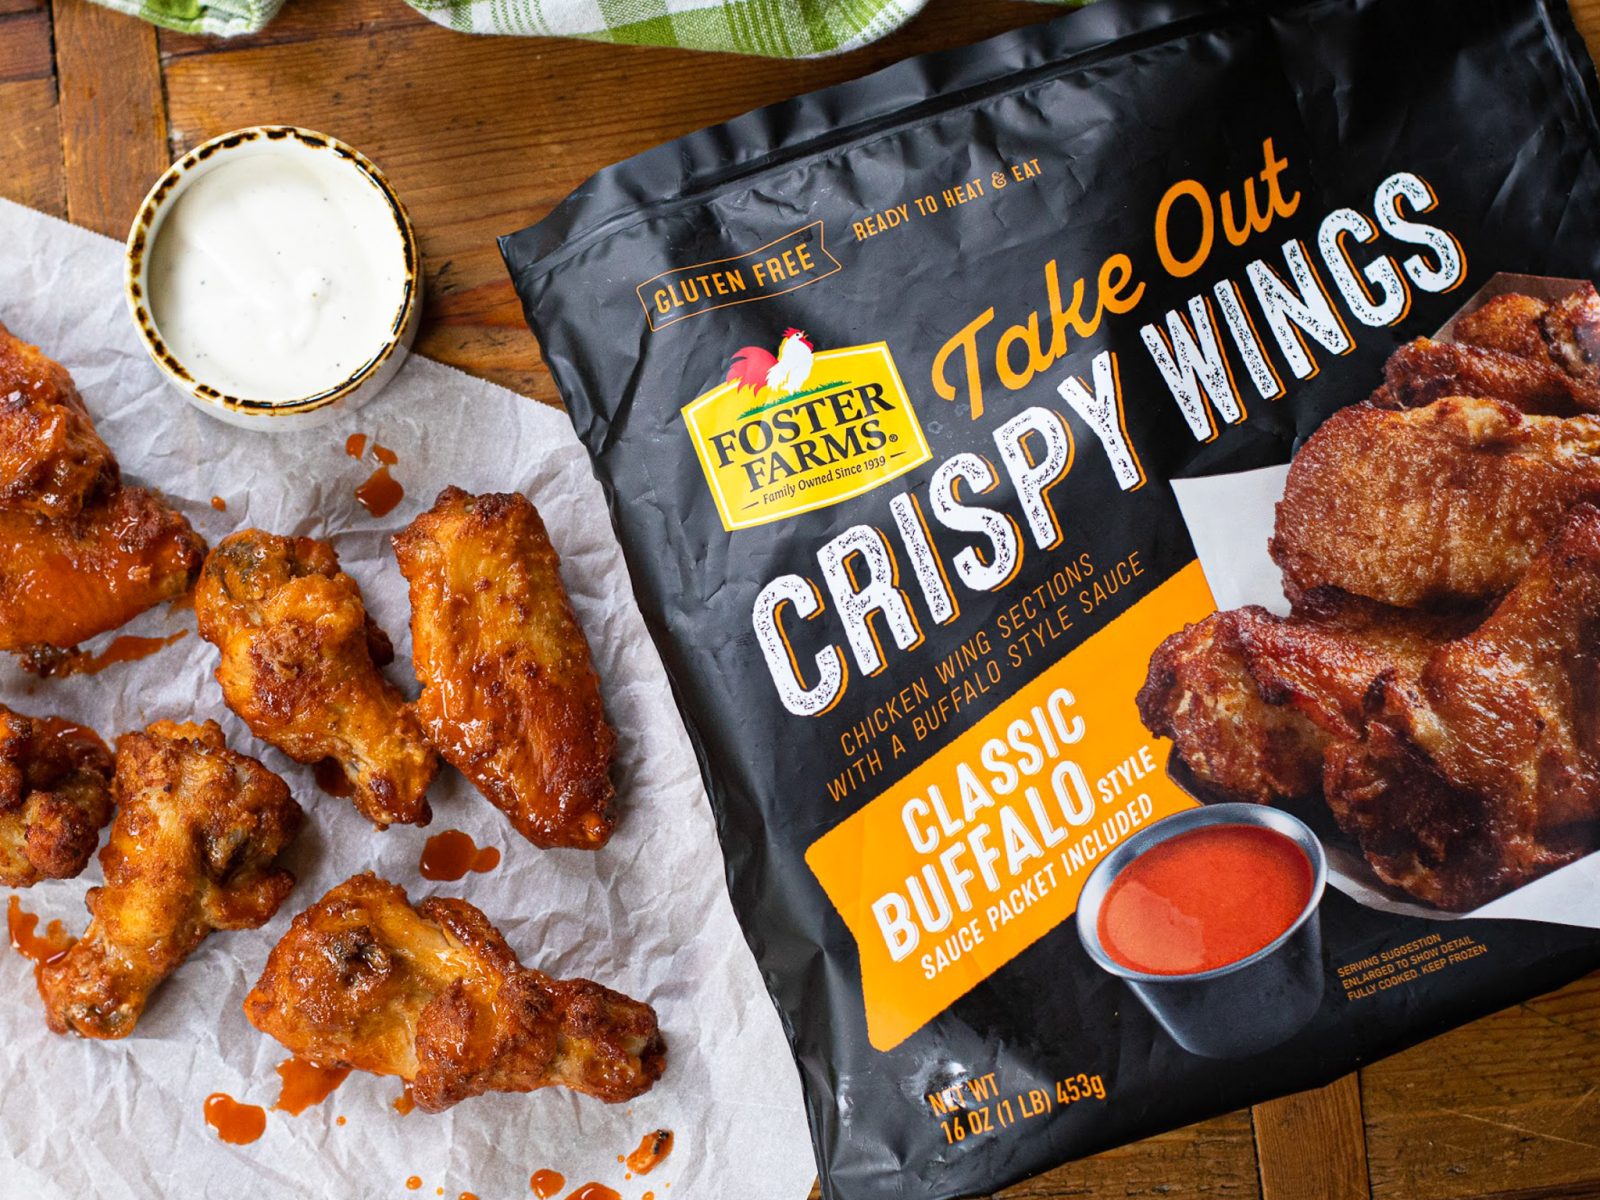 Foster Farms Take Out Crispy Wings A Low As $4.99 At Kroger (Regular Price $10.29)